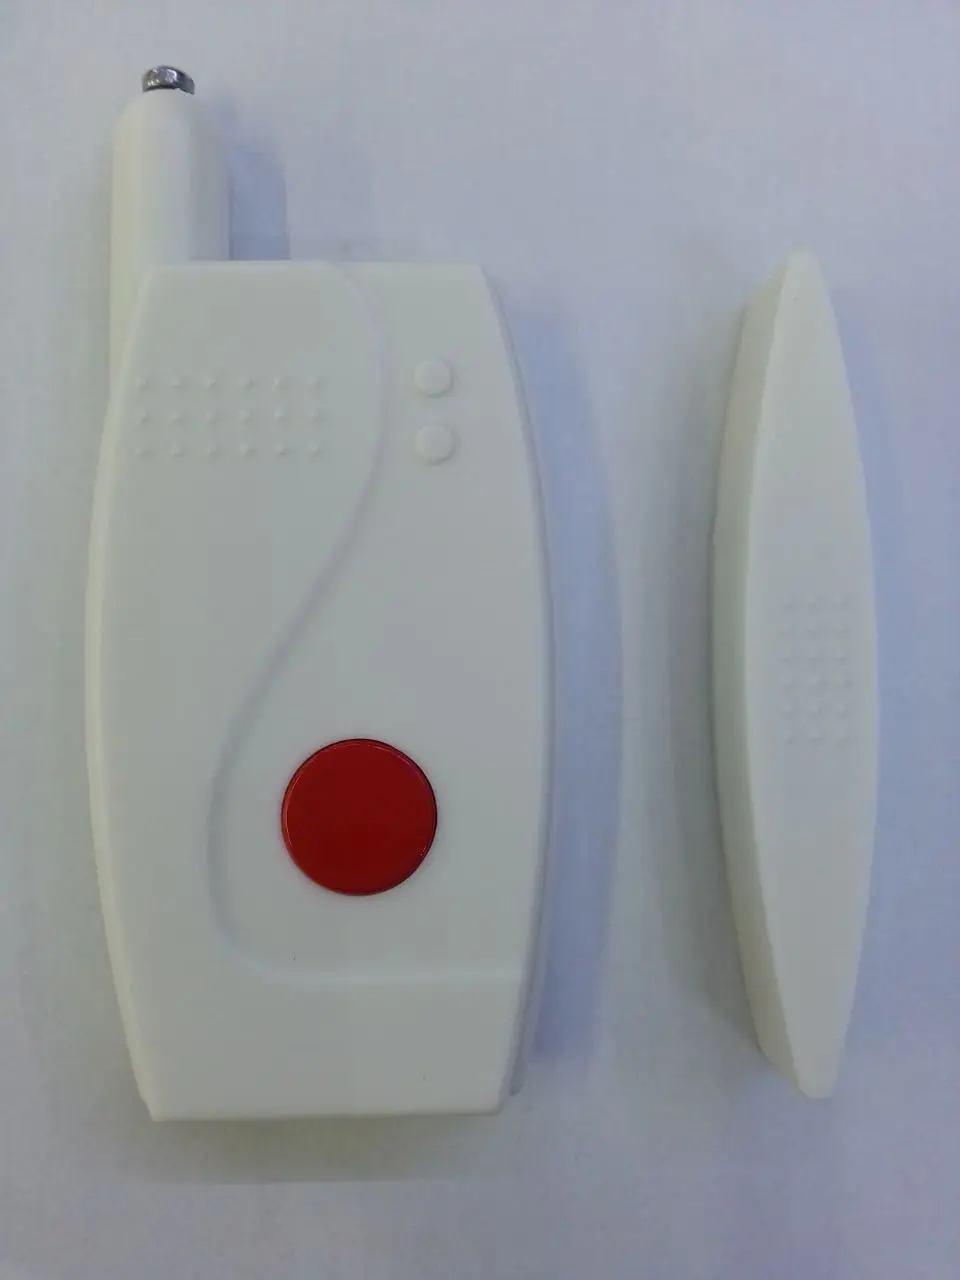 Automaticlly Coding Wireless Door Open Sensor 433MHz Frequency With Panic Button Home